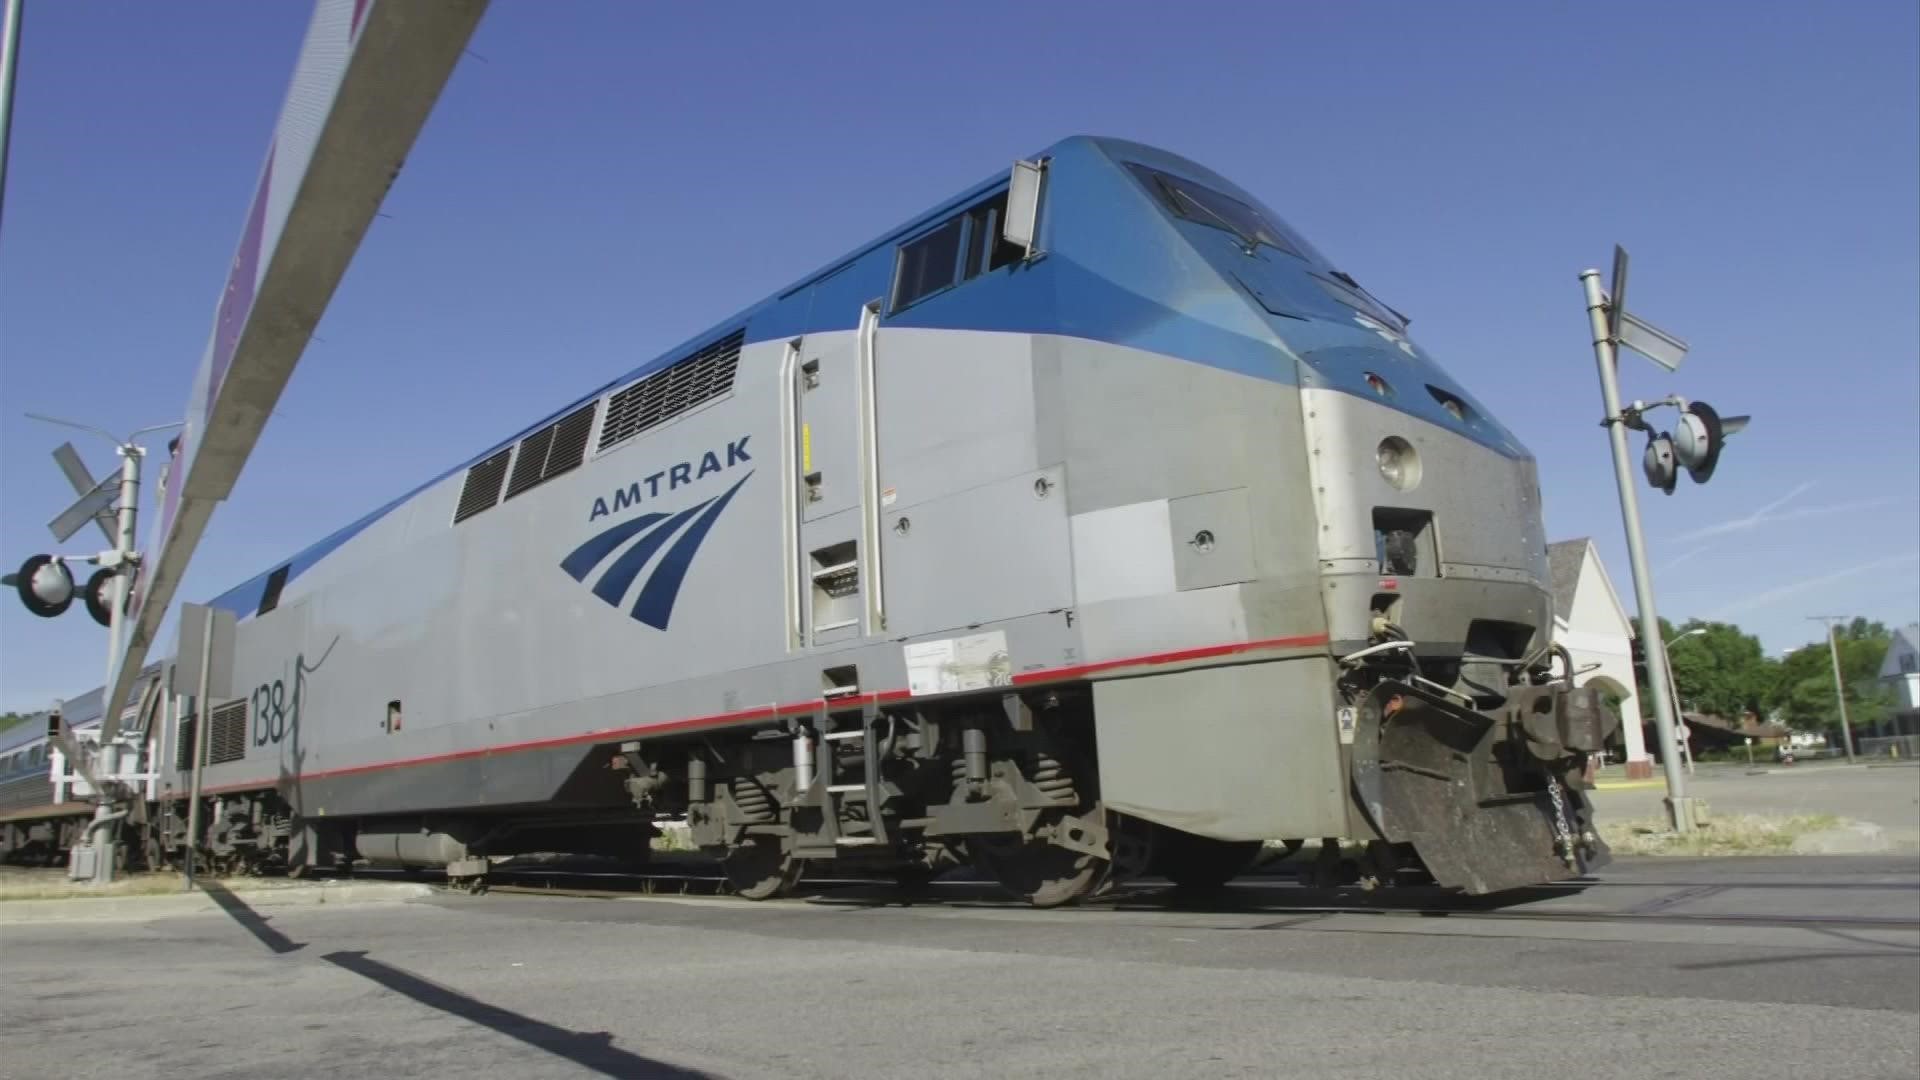 Amtrak is looking to add a line through the 3C+D Corridor, which connects Cleveland, Columbus, Dayton, and Cincinnati.